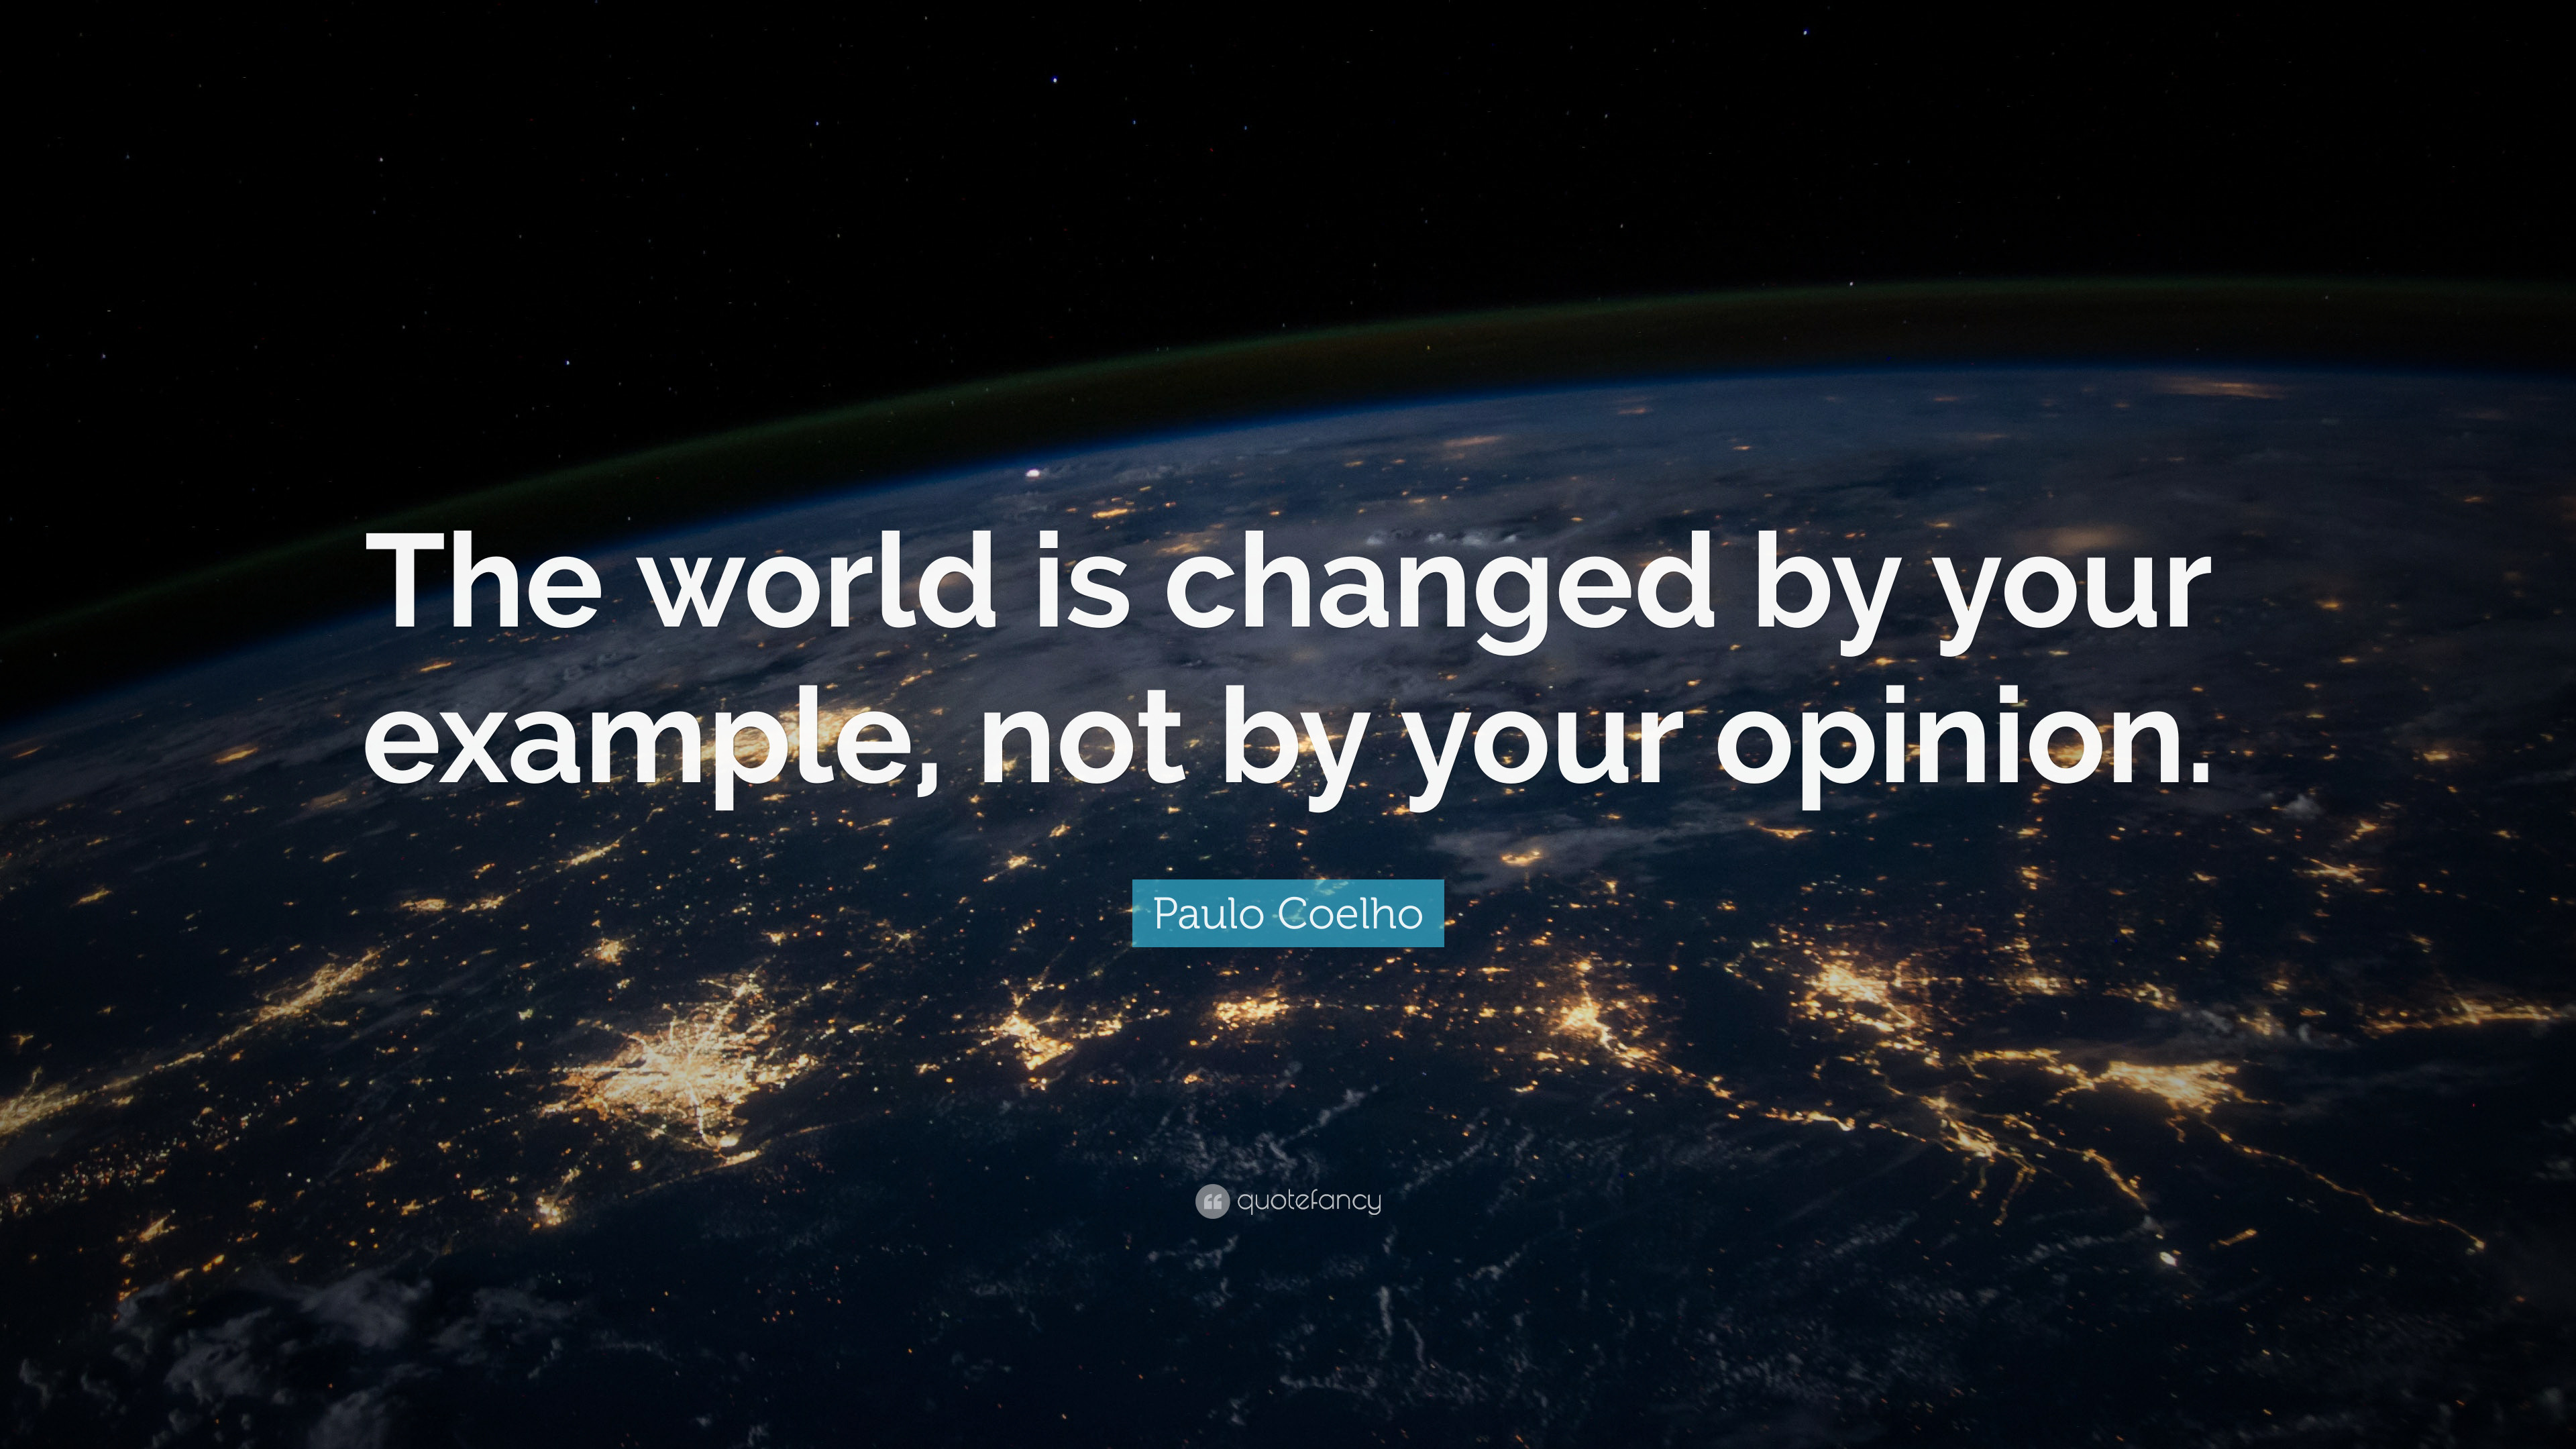 3840x2160 Paulo Coelho Quote: “The world is changed by your example, not by your